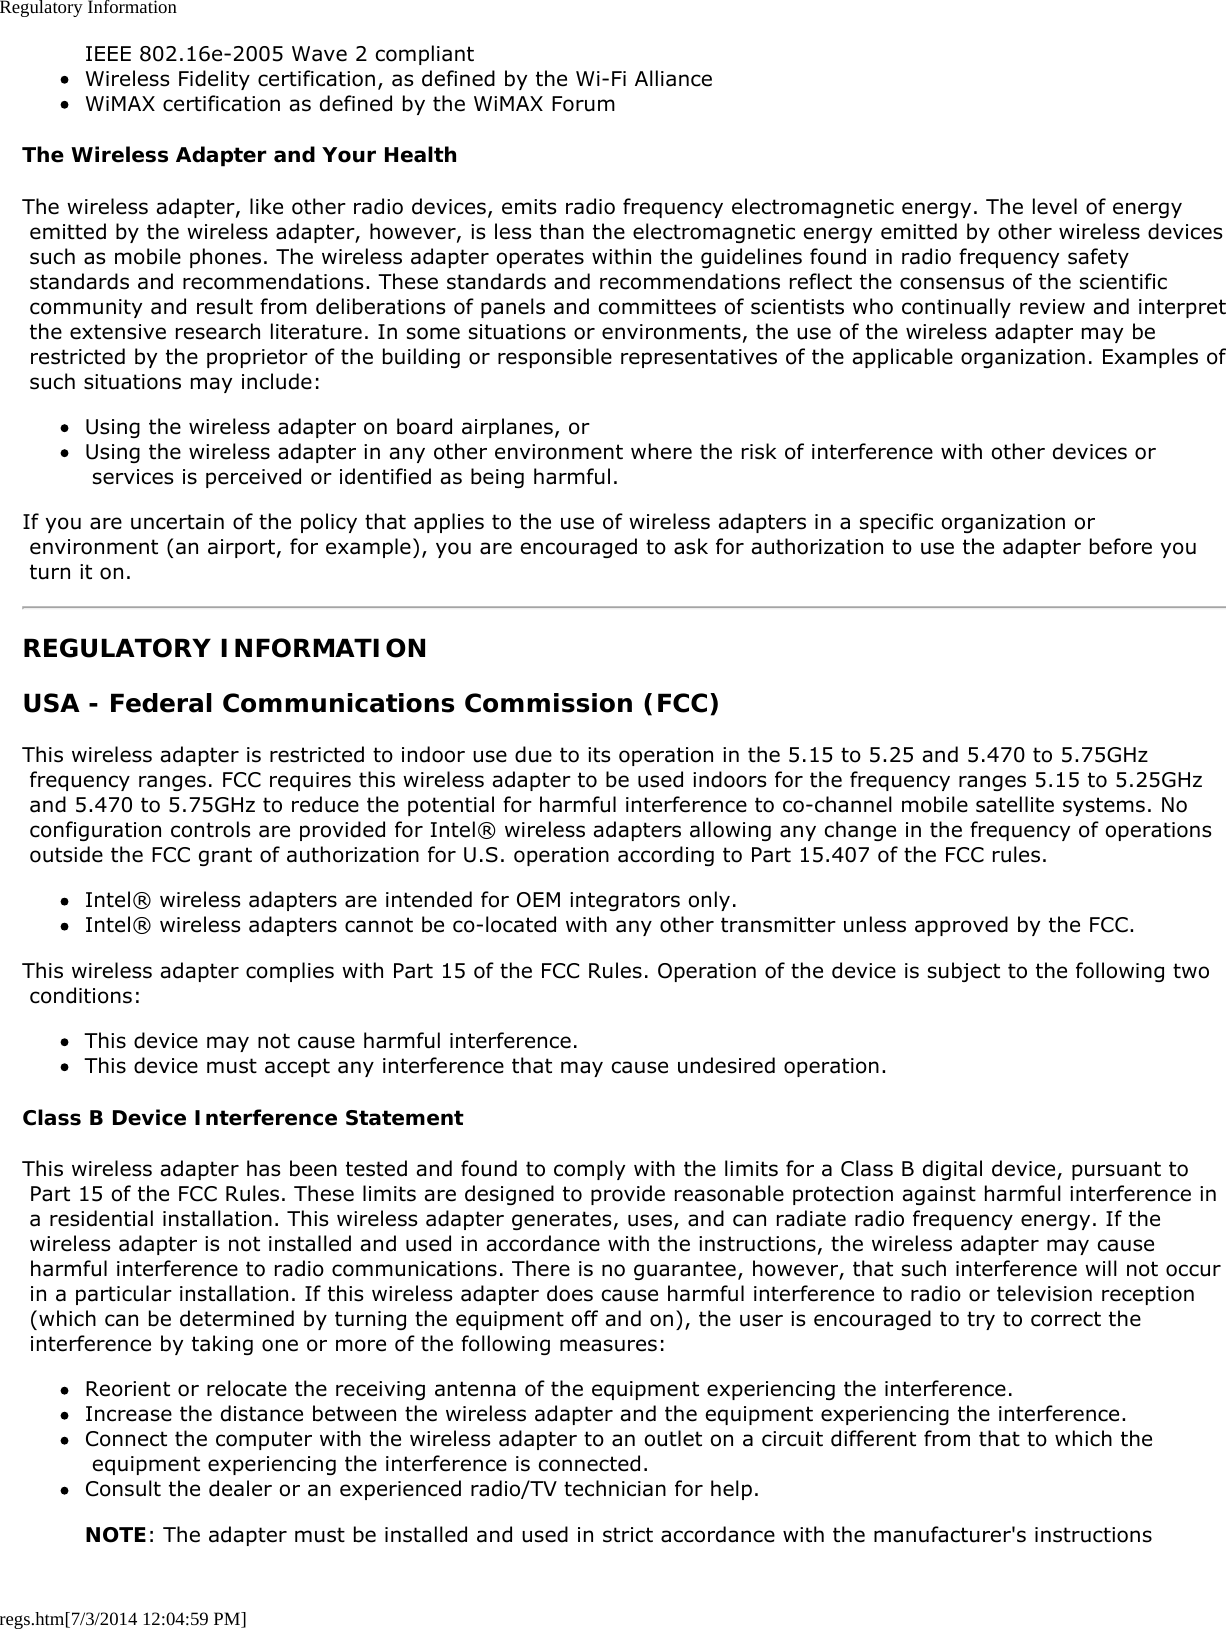 Regulatory Informationregs.htm[7/3/2014 12:04:59 PM]IEEE 802.16e-2005 Wave 2 compliantWireless Fidelity certification, as defined by the Wi-Fi AllianceWiMAX certification as defined by the WiMAX ForumThe Wireless Adapter and Your HealthThe wireless adapter, like other radio devices, emits radio frequency electromagnetic energy. The level of energy emitted by the wireless adapter, however, is less than the electromagnetic energy emitted by other wireless devices such as mobile phones. The wireless adapter operates within the guidelines found in radio frequency safety standards and recommendations. These standards and recommendations reflect the consensus of the scientific community and result from deliberations of panels and committees of scientists who continually review and interpret the extensive research literature. In some situations or environments, the use of the wireless adapter may be restricted by the proprietor of the building or responsible representatives of the applicable organization. Examples of such situations may include:Using the wireless adapter on board airplanes, orUsing the wireless adapter in any other environment where the risk of interference with other devices or services is perceived or identified as being harmful.If you are uncertain of the policy that applies to the use of wireless adapters in a specific organization or environment (an airport, for example), you are encouraged to ask for authorization to use the adapter before you turn it on.REGULATORY INFORMATIONUSA - Federal Communications Commission (FCC)This wireless adapter is restricted to indoor use due to its operation in the 5.15 to 5.25 and 5.470 to 5.75GHz frequency ranges. FCC requires this wireless adapter to be used indoors for the frequency ranges 5.15 to 5.25GHz and 5.470 to 5.75GHz to reduce the potential for harmful interference to co-channel mobile satellite systems. No configuration controls are provided for Intel® wireless adapters allowing any change in the frequency of operations outside the FCC grant of authorization for U.S. operation according to Part 15.407 of the FCC rules.Intel® wireless adapters are intended for OEM integrators only.Intel® wireless adapters cannot be co-located with any other transmitter unless approved by the FCC.This wireless adapter complies with Part 15 of the FCC Rules. Operation of the device is subject to the following two conditions:This device may not cause harmful interference.This device must accept any interference that may cause undesired operation.Class B Device Interference StatementThis wireless adapter has been tested and found to comply with the limits for a Class B digital device, pursuant to Part 15 of the FCC Rules. These limits are designed to provide reasonable protection against harmful interference in a residential installation. This wireless adapter generates, uses, and can radiate radio frequency energy. If the wireless adapter is not installed and used in accordance with the instructions, the wireless adapter may cause harmful interference to radio communications. There is no guarantee, however, that such interference will not occur in a particular installation. If this wireless adapter does cause harmful interference to radio or television reception (which can be determined by turning the equipment off and on), the user is encouraged to try to correct the interference by taking one or more of the following measures:Reorient or relocate the receiving antenna of the equipment experiencing the interference.Increase the distance between the wireless adapter and the equipment experiencing the interference.Connect the computer with the wireless adapter to an outlet on a circuit different from that to which the equipment experiencing the interference is connected.Consult the dealer or an experienced radio/TV technician for help.NOTE: The adapter must be installed and used in strict accordance with the manufacturer&apos;s instructions